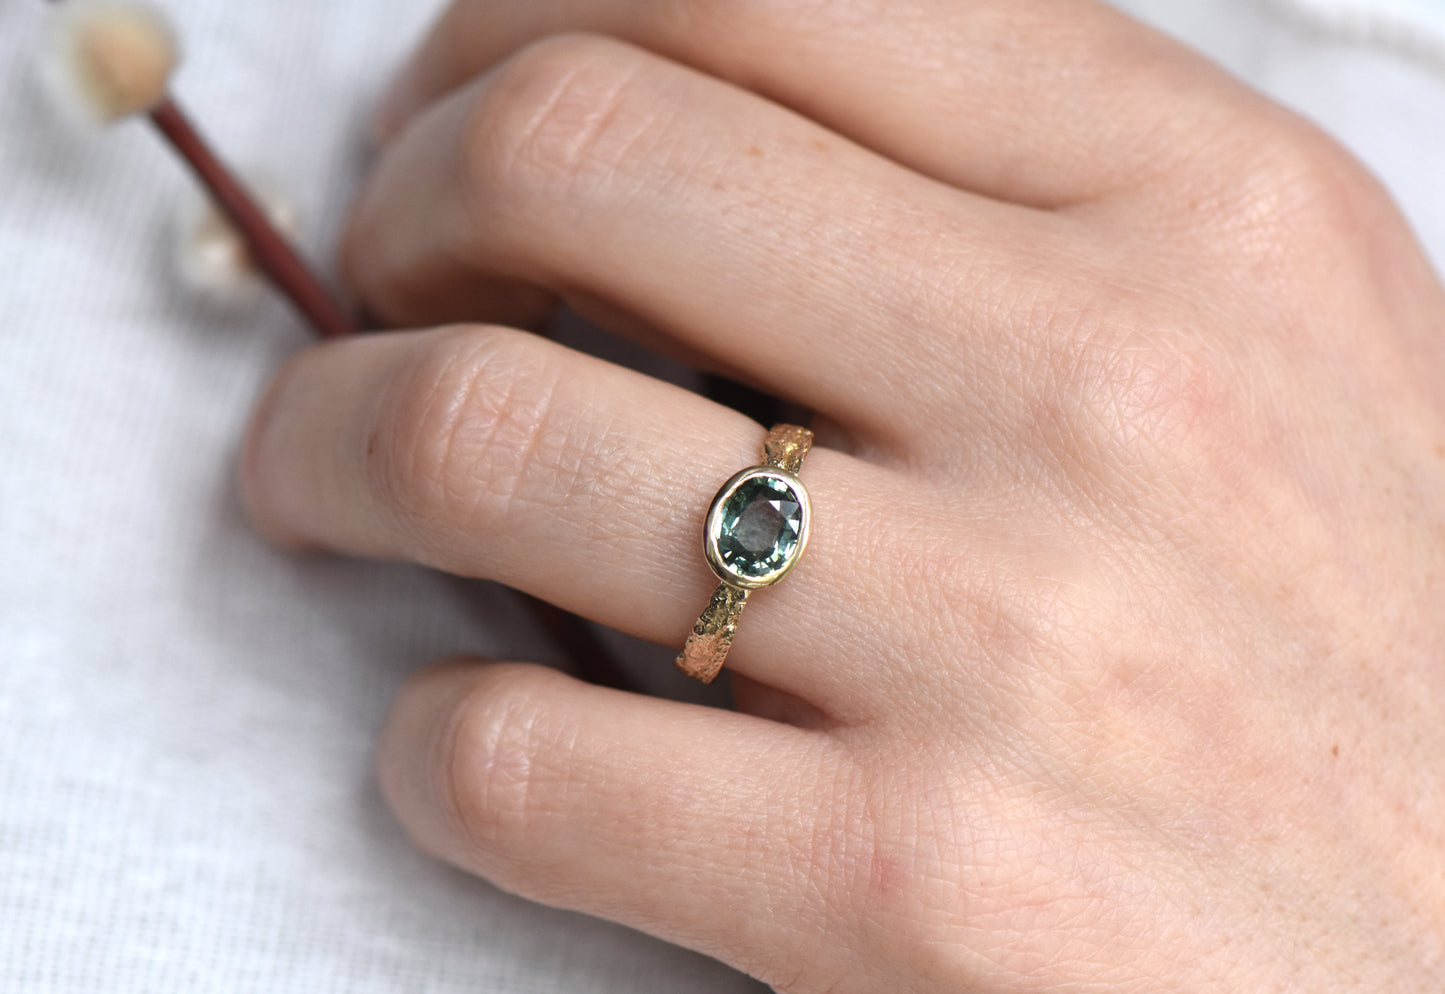 14ct Gold London Plane Ring With Green Sapphire